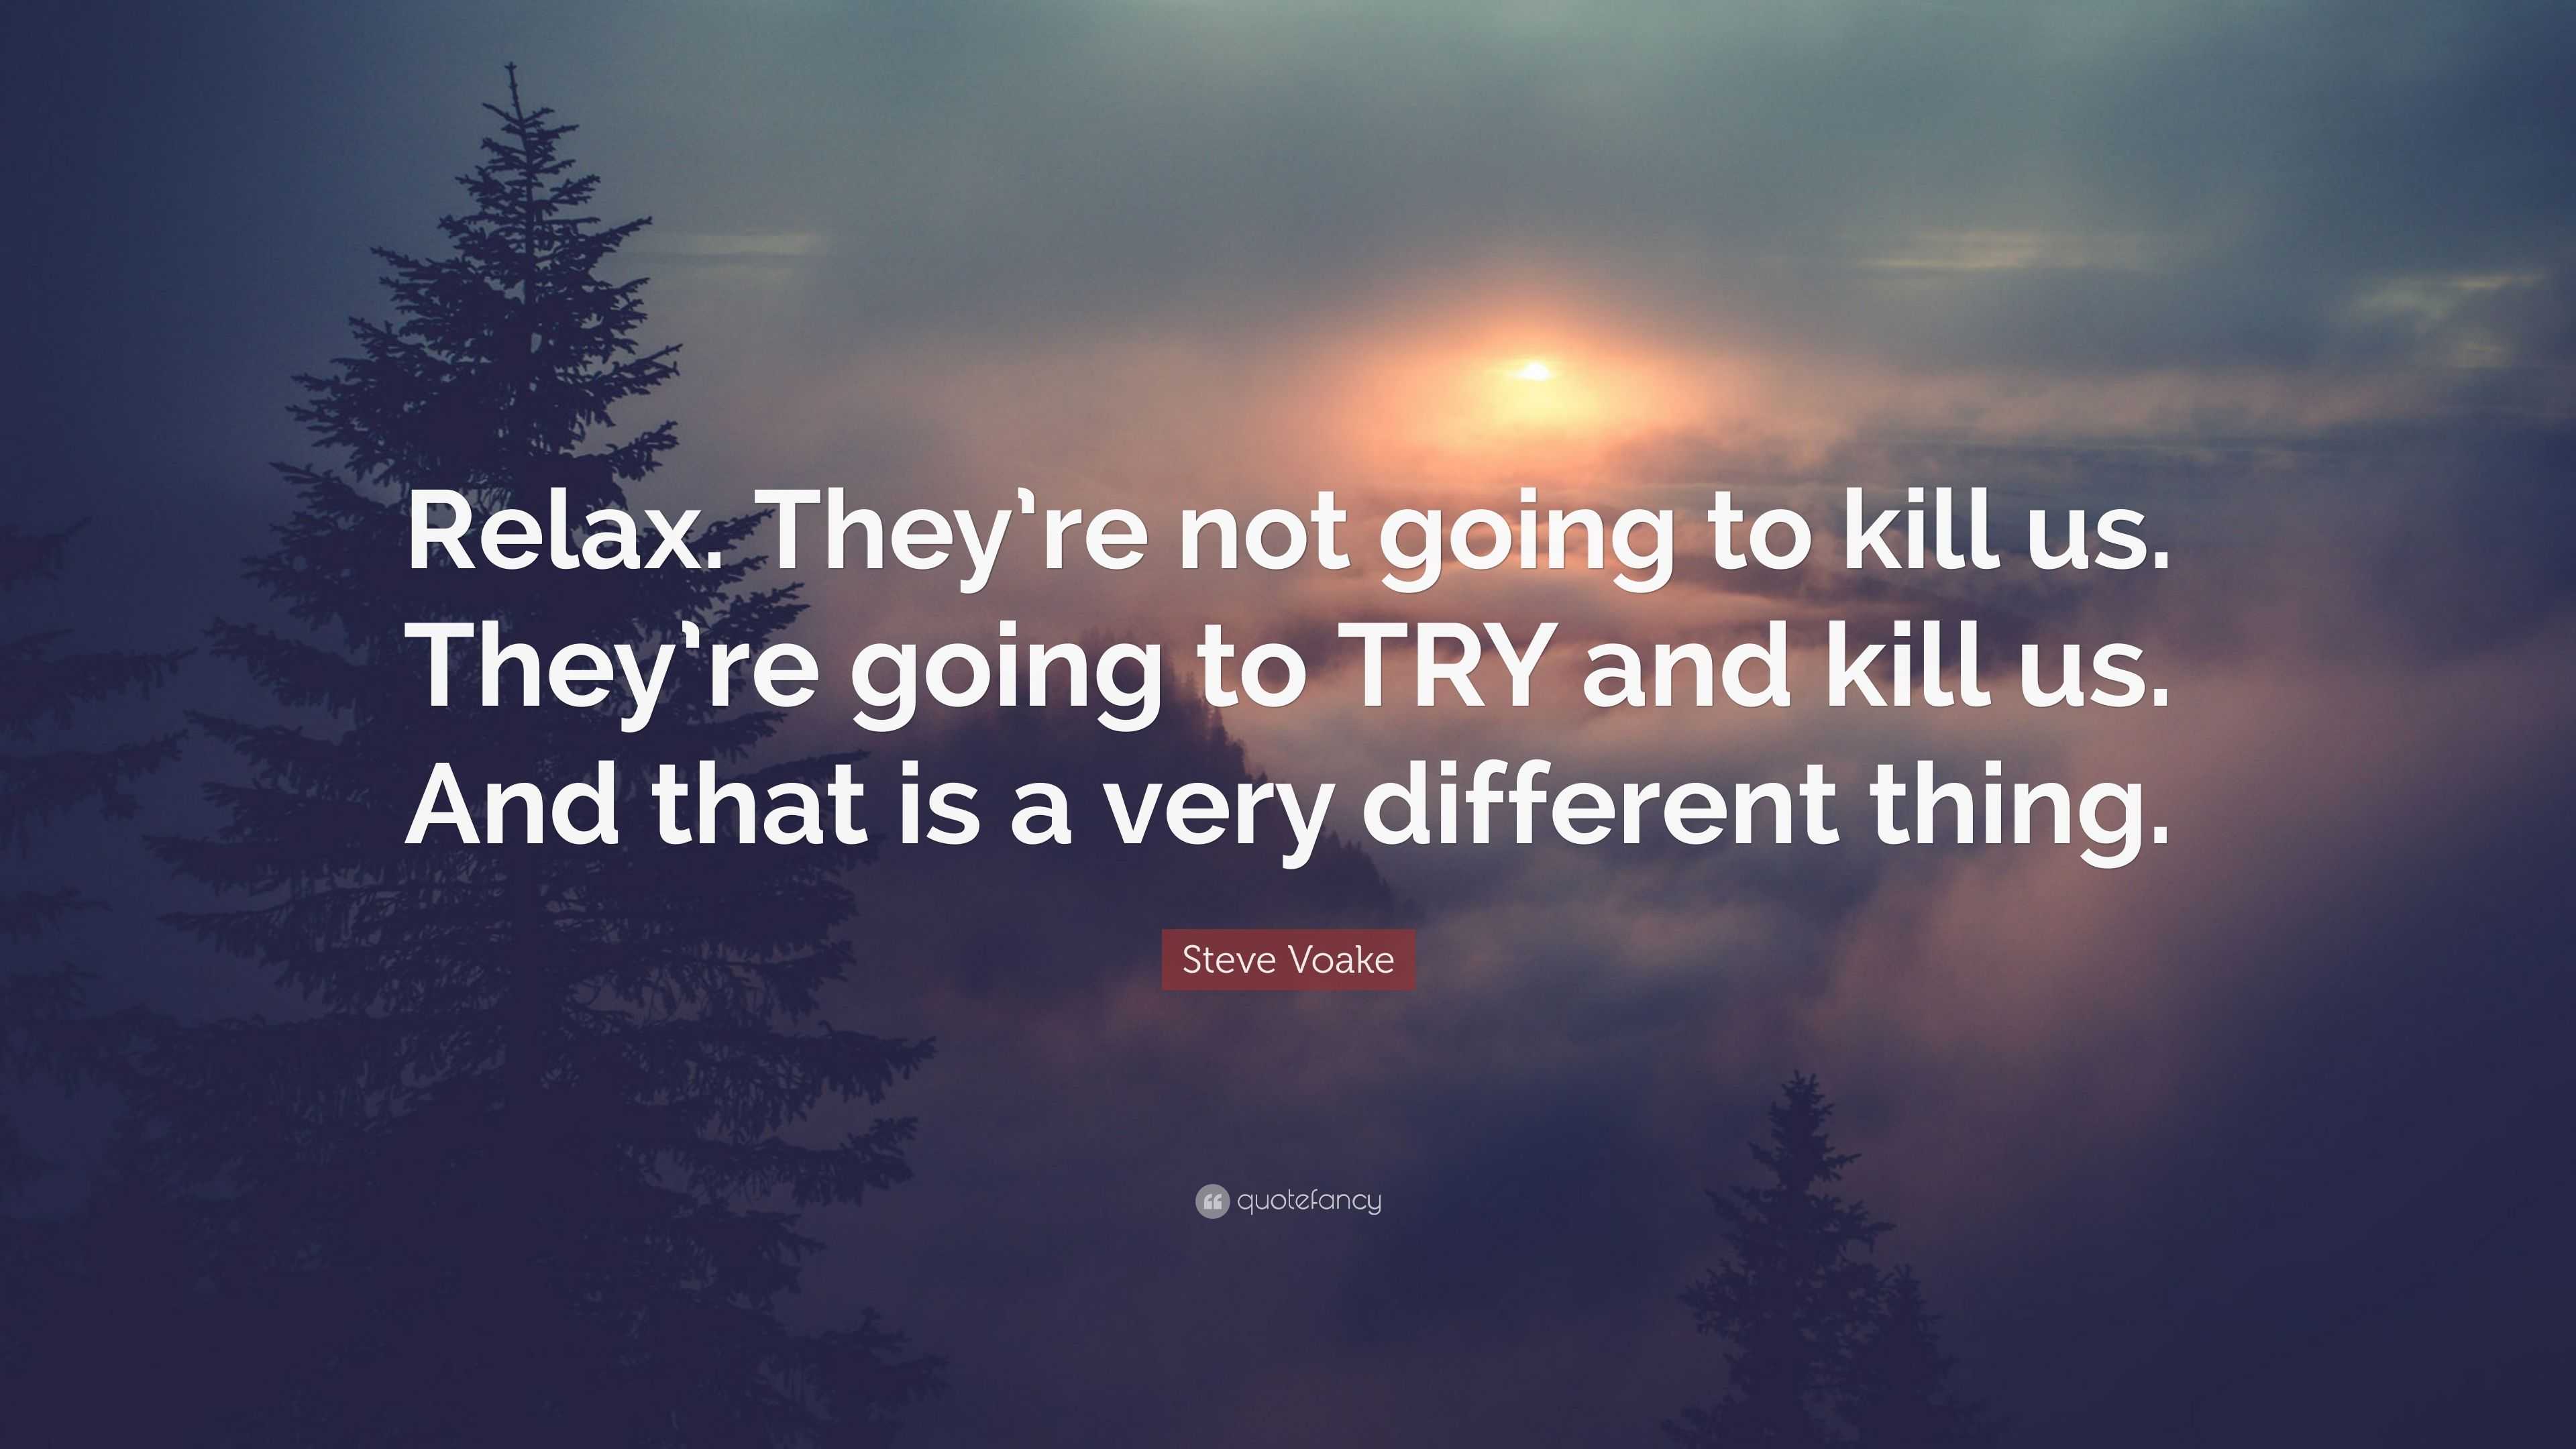 Steve Voake Quote: “Relax. They’re not going to kill us. They’re going ...